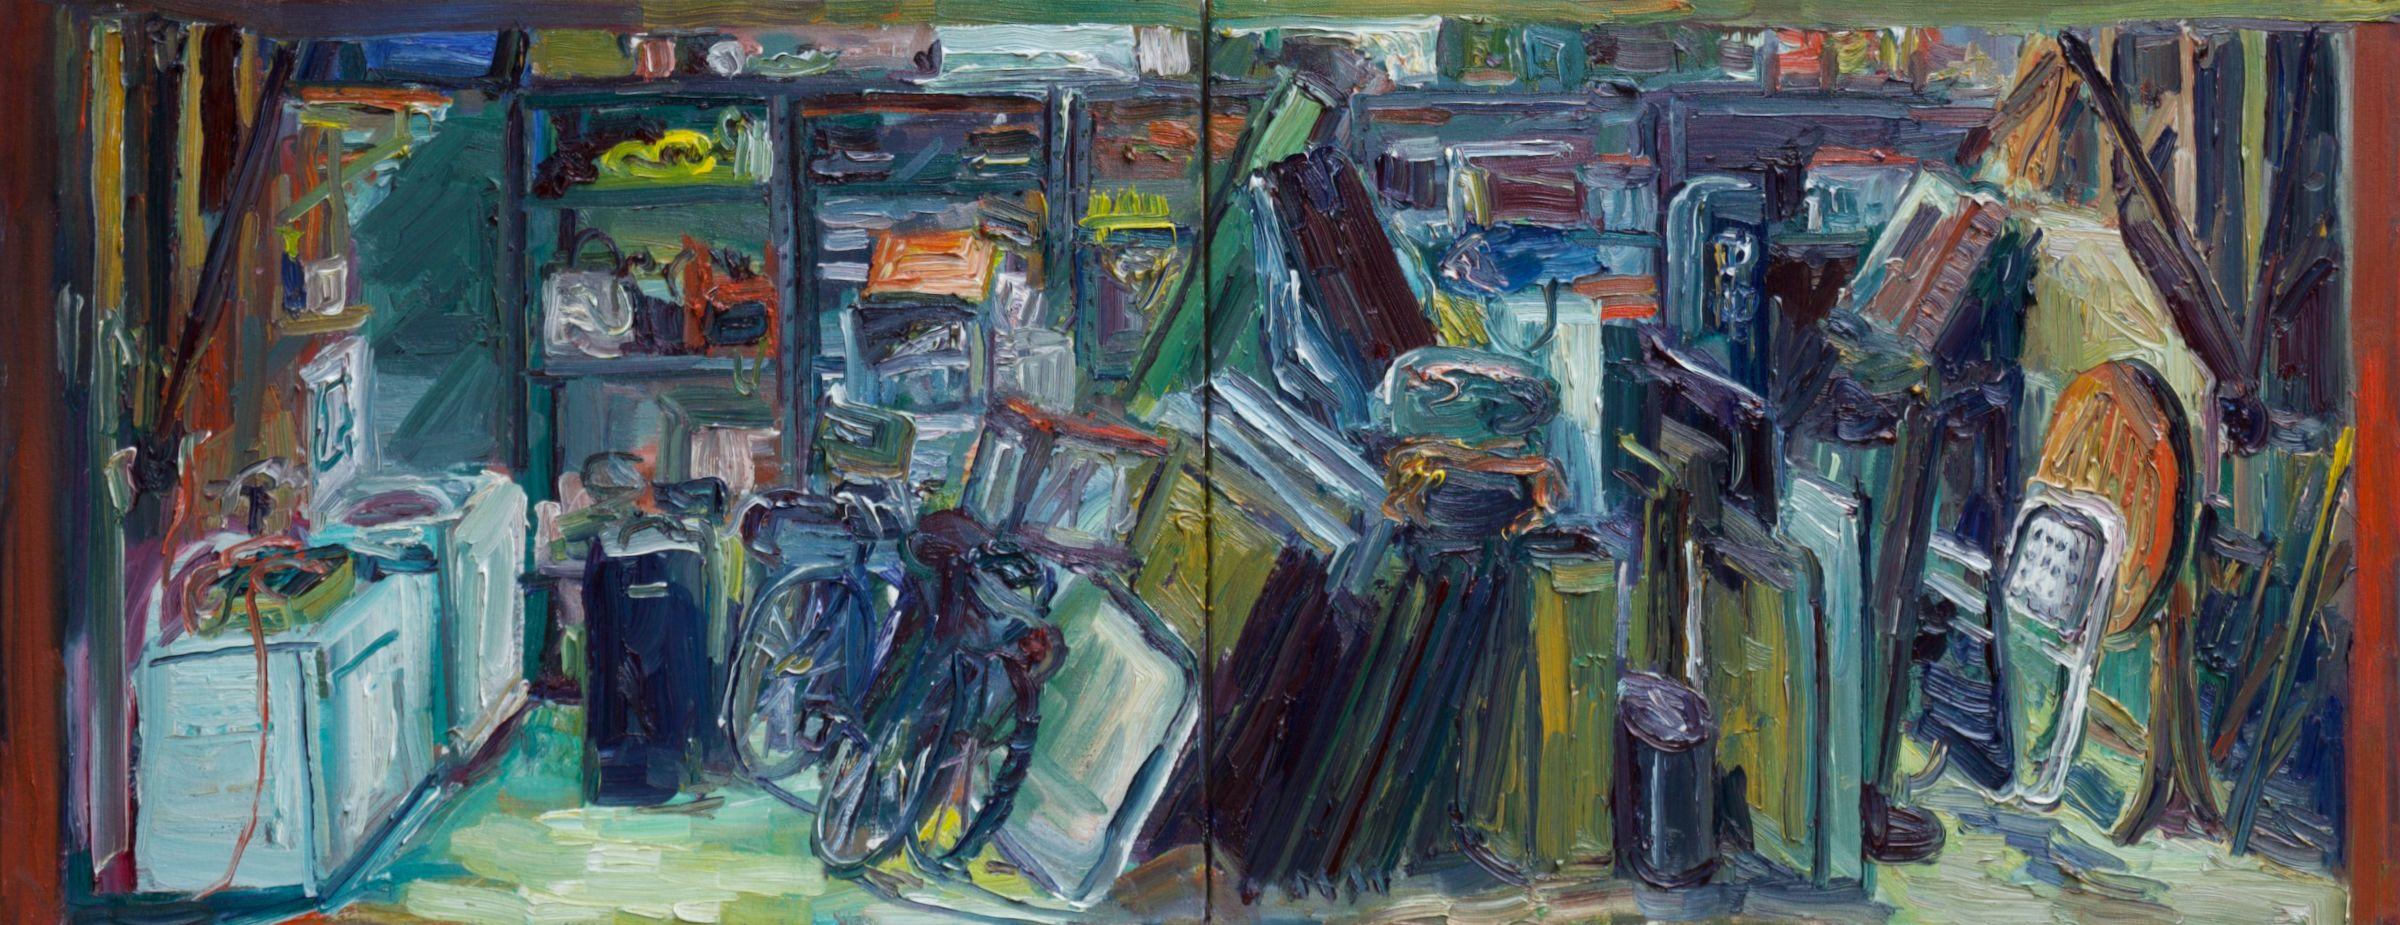 Plein air oil painting of my garage at night. Oil on two canvases. :: Painting :: Impressionist :: This piece comes with an official certificate of authenticity signed by the artist :: Ready to Hang: No :: Signed: Yes :: Signature Location: on the